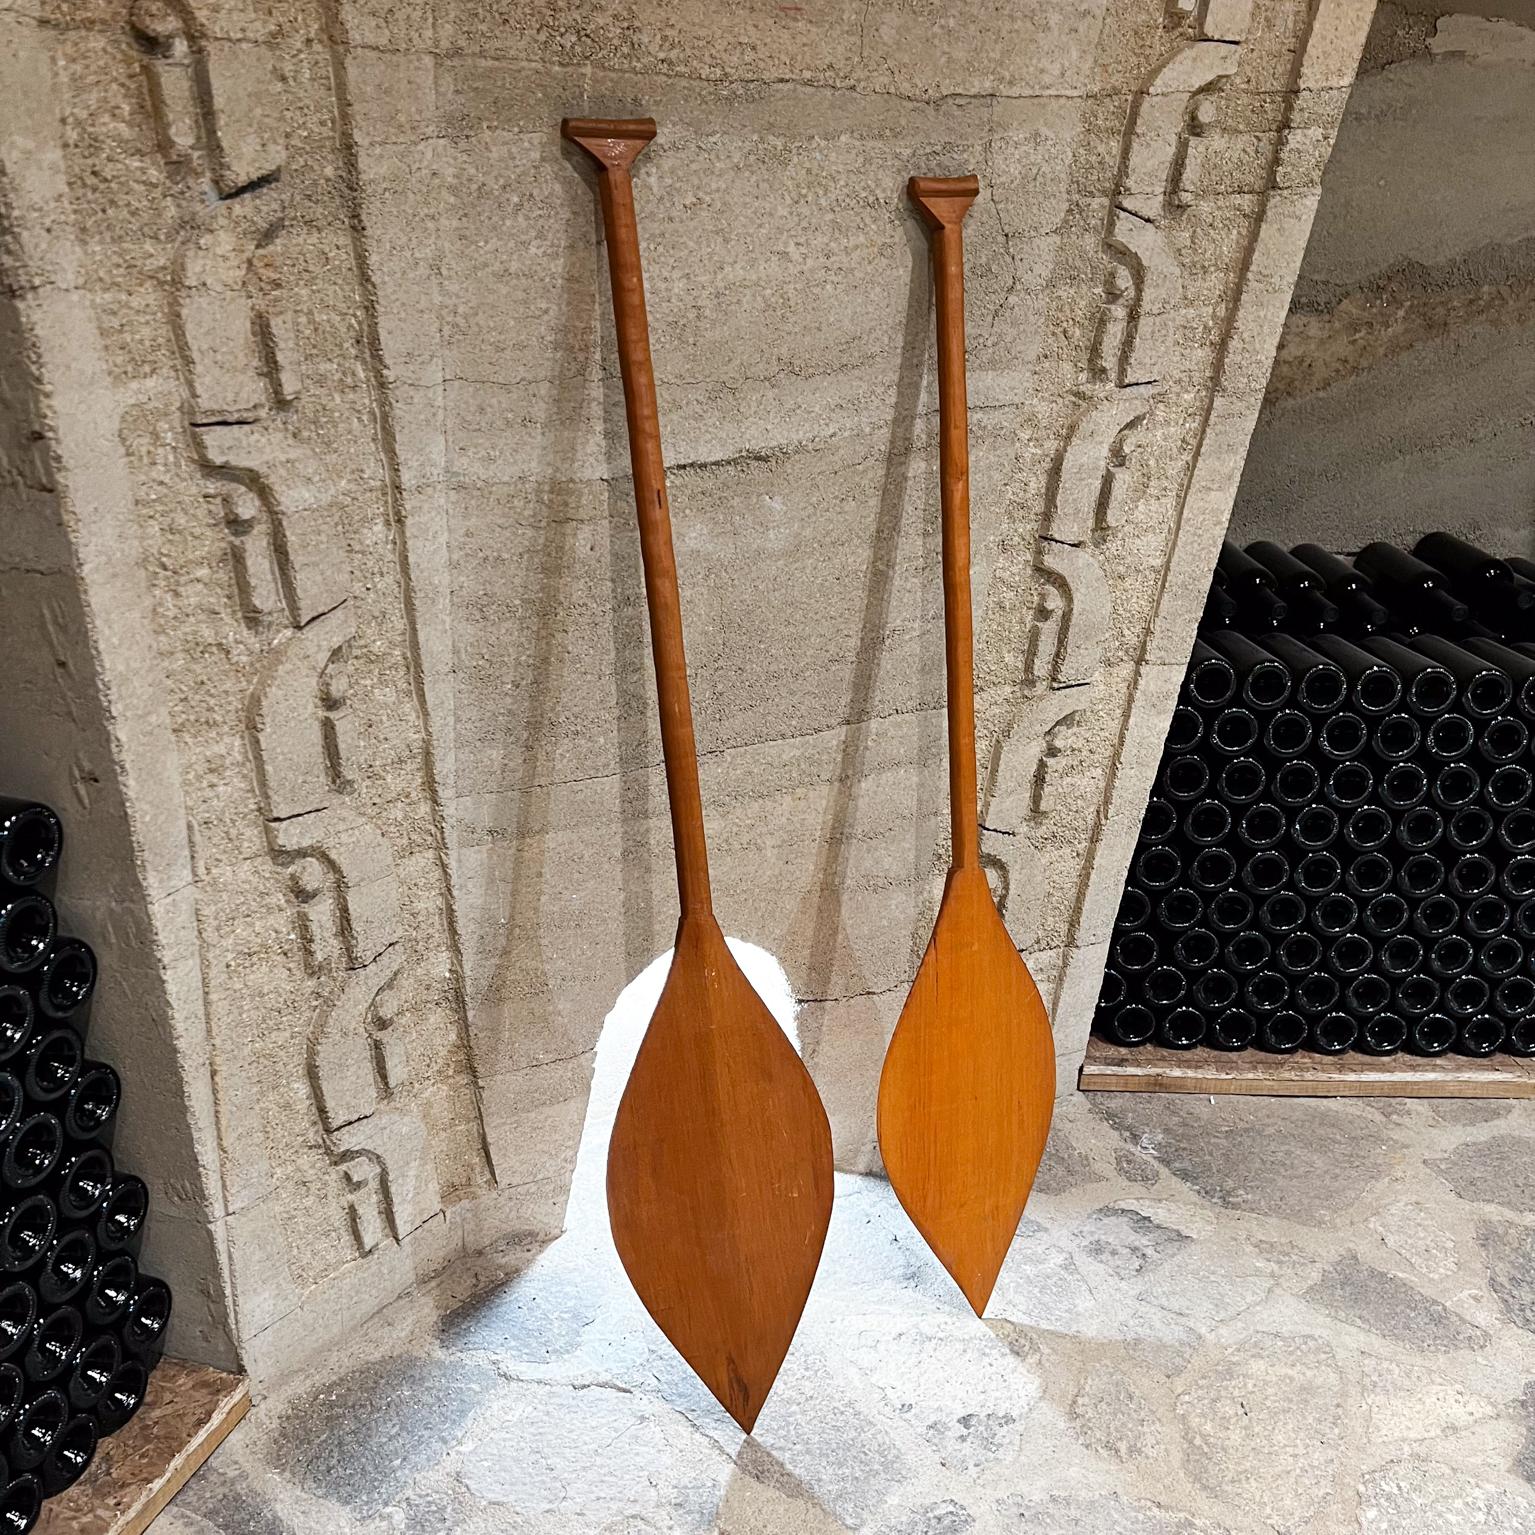 Mid-Century Modern 1970s Handmade Decorative Wood Paddles South American Amazon For Sale